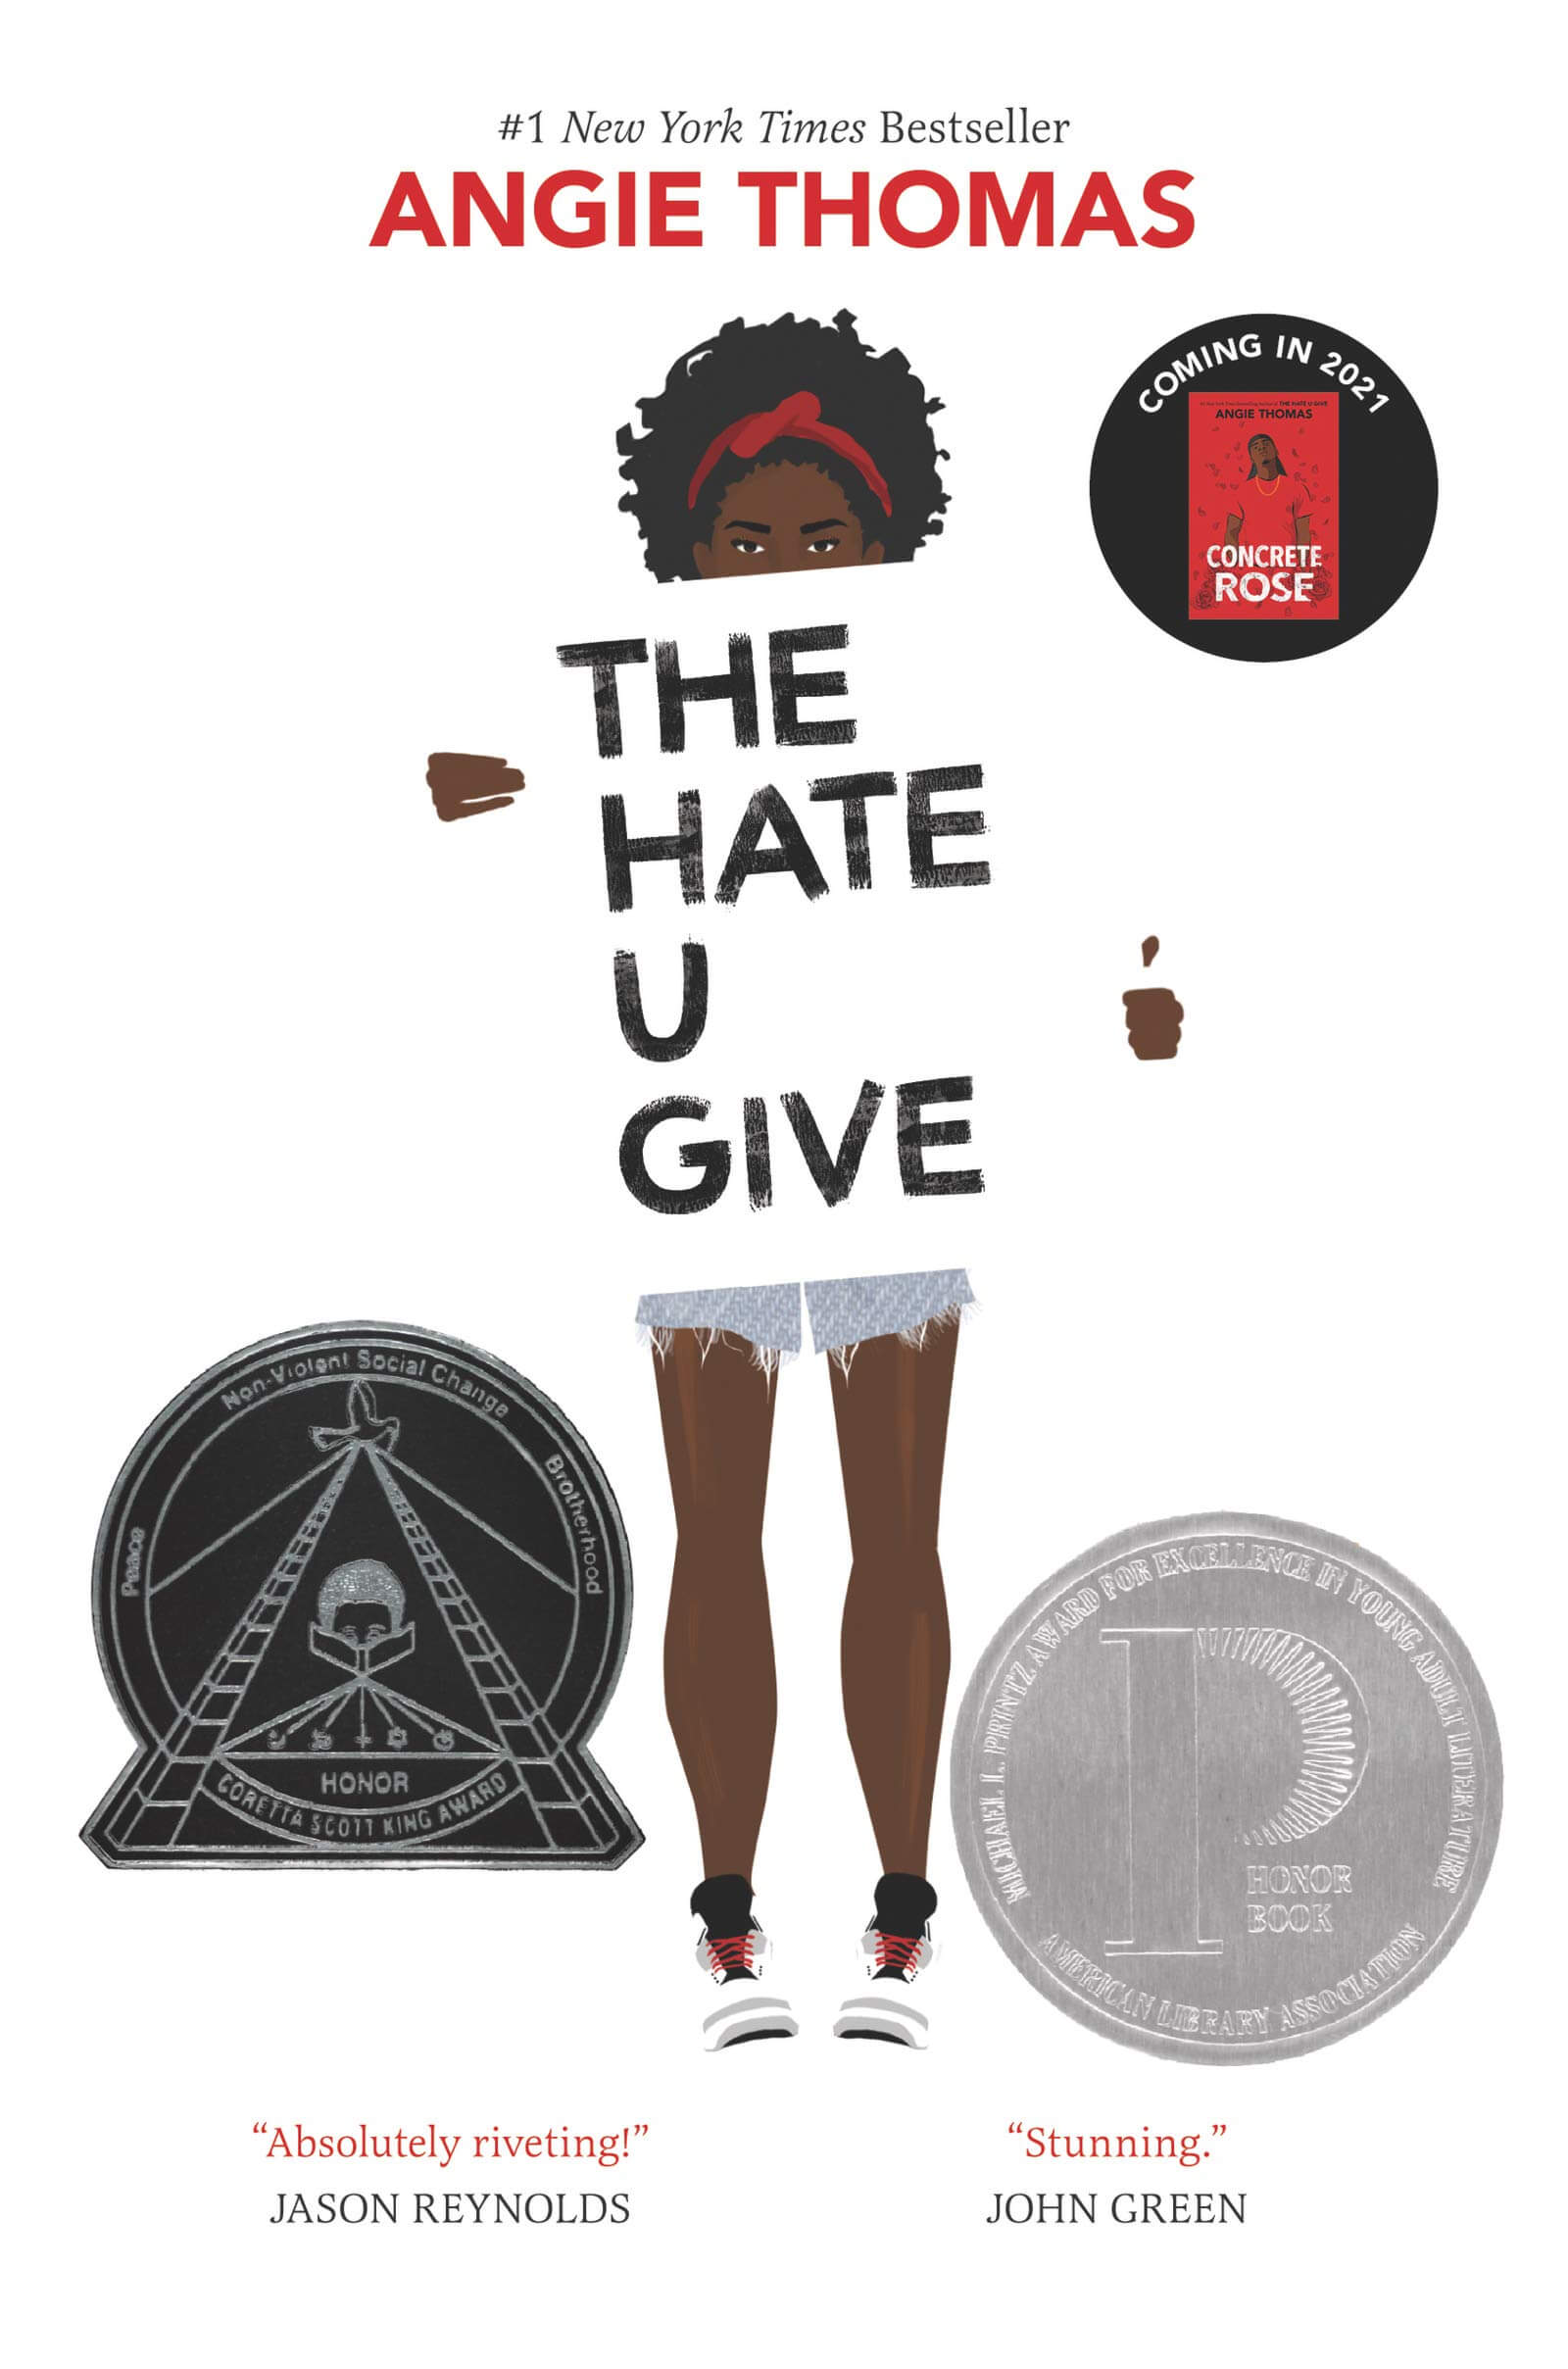   The Hate You Give, by Angie Thomas